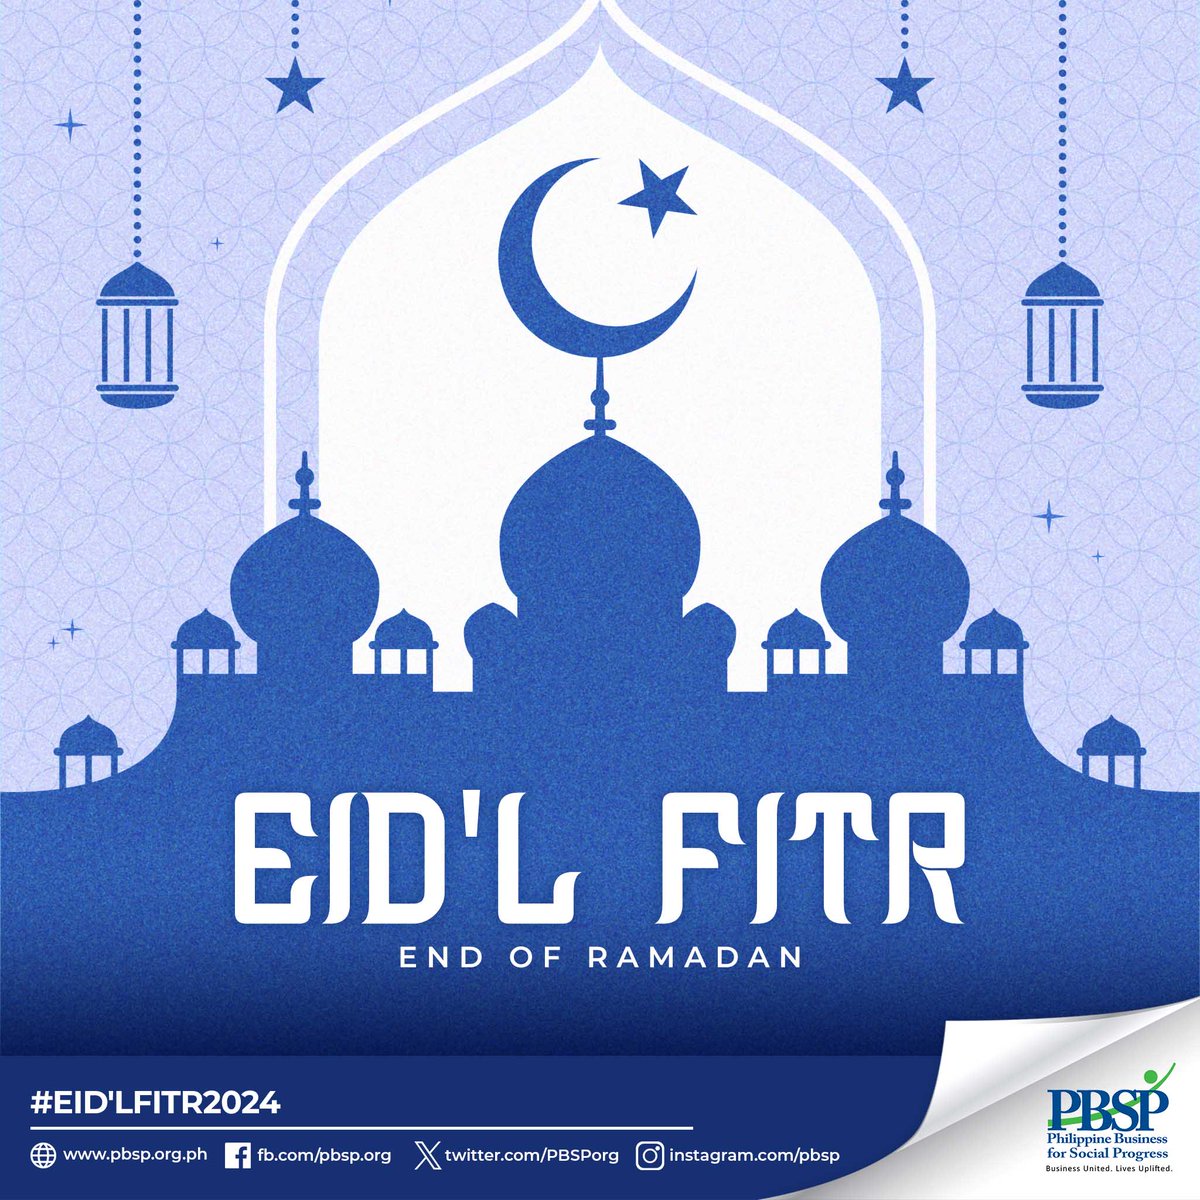 Eid Mubarak 🕌☪️ PBSP stands in solidarity with our Muslim brothers and sisters as they celebrate Eid'l Fitr, the end of the Islamic fasting month of Ramadan.